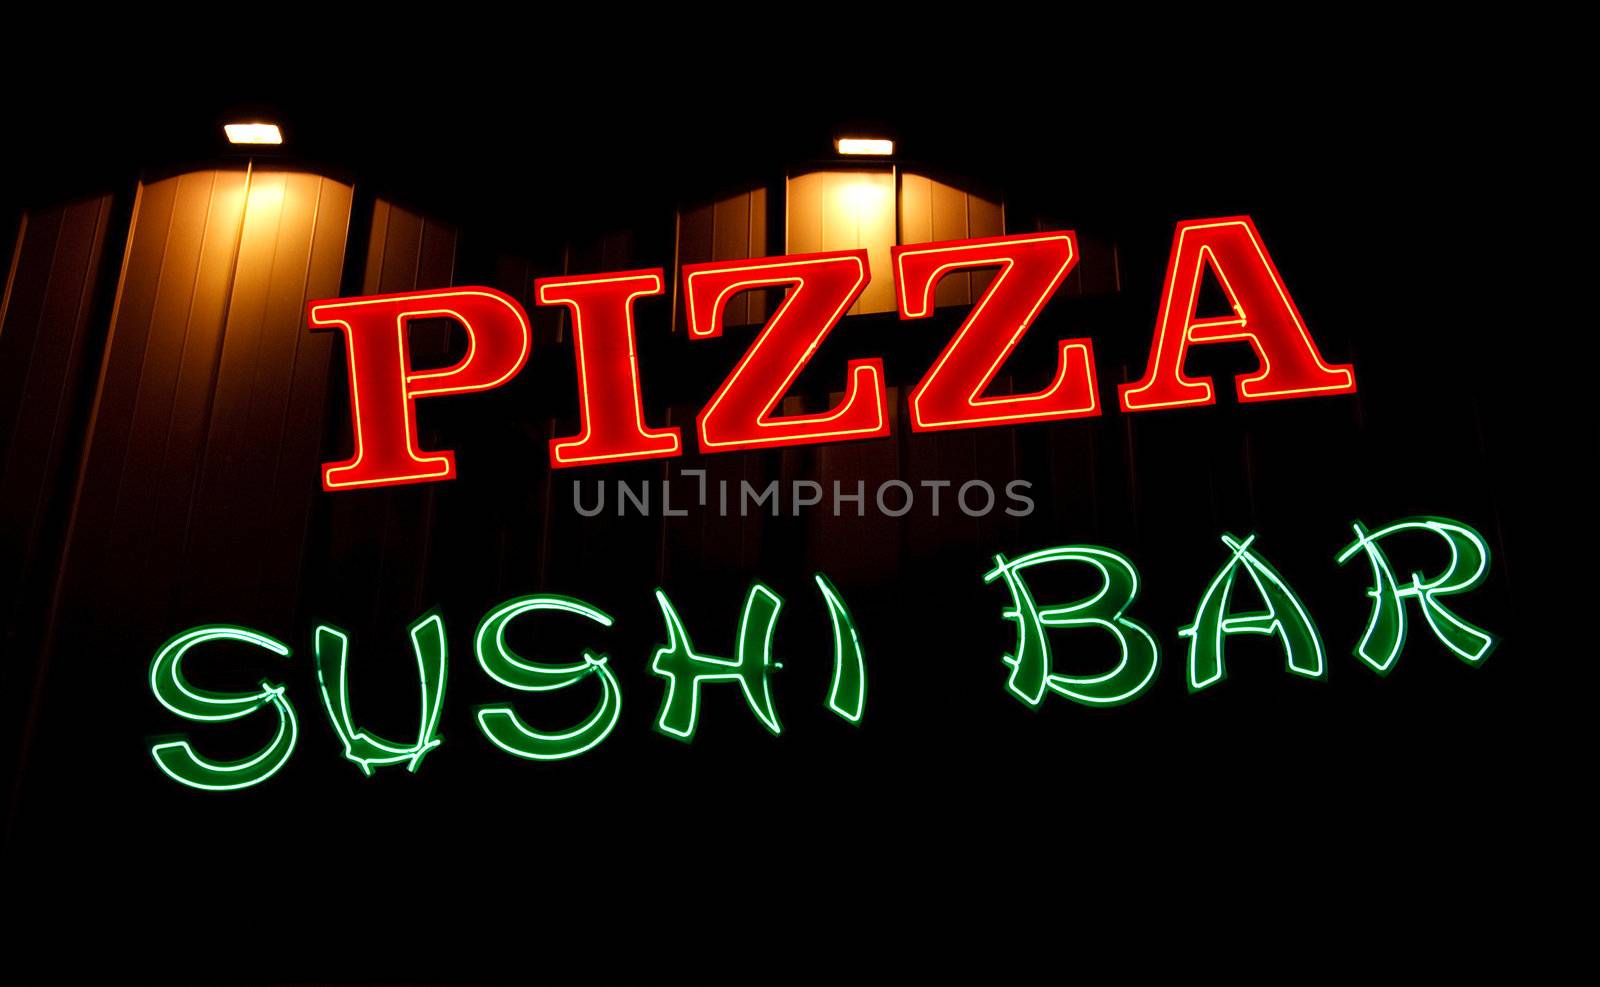 Pizza and Sushi Bar Neon Sign by sbonk